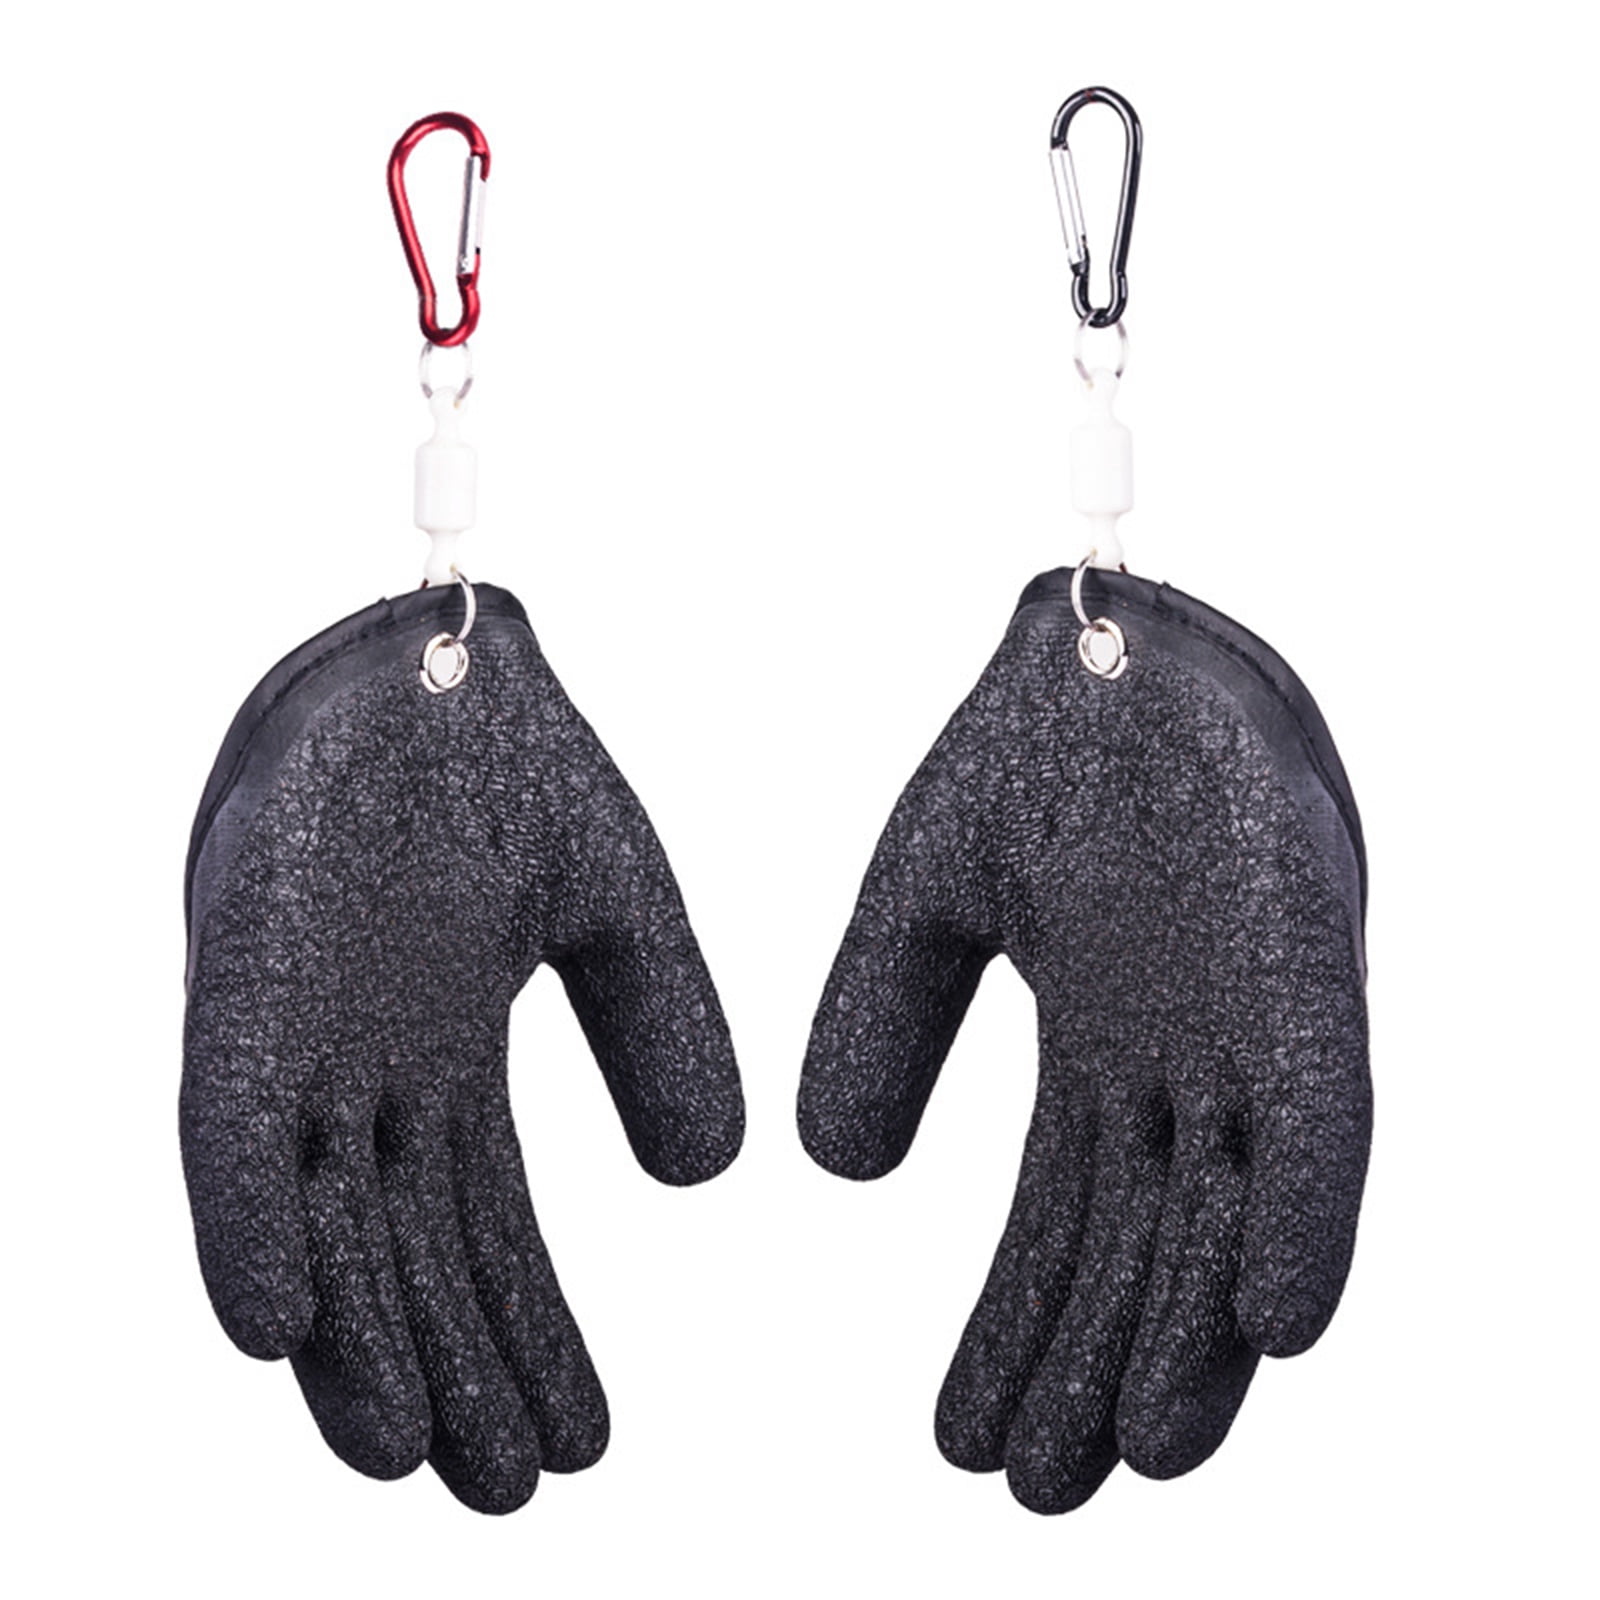 Fishing Gloves With Magnet Release Fisherman Fishing Anti-Puncture Gloves 